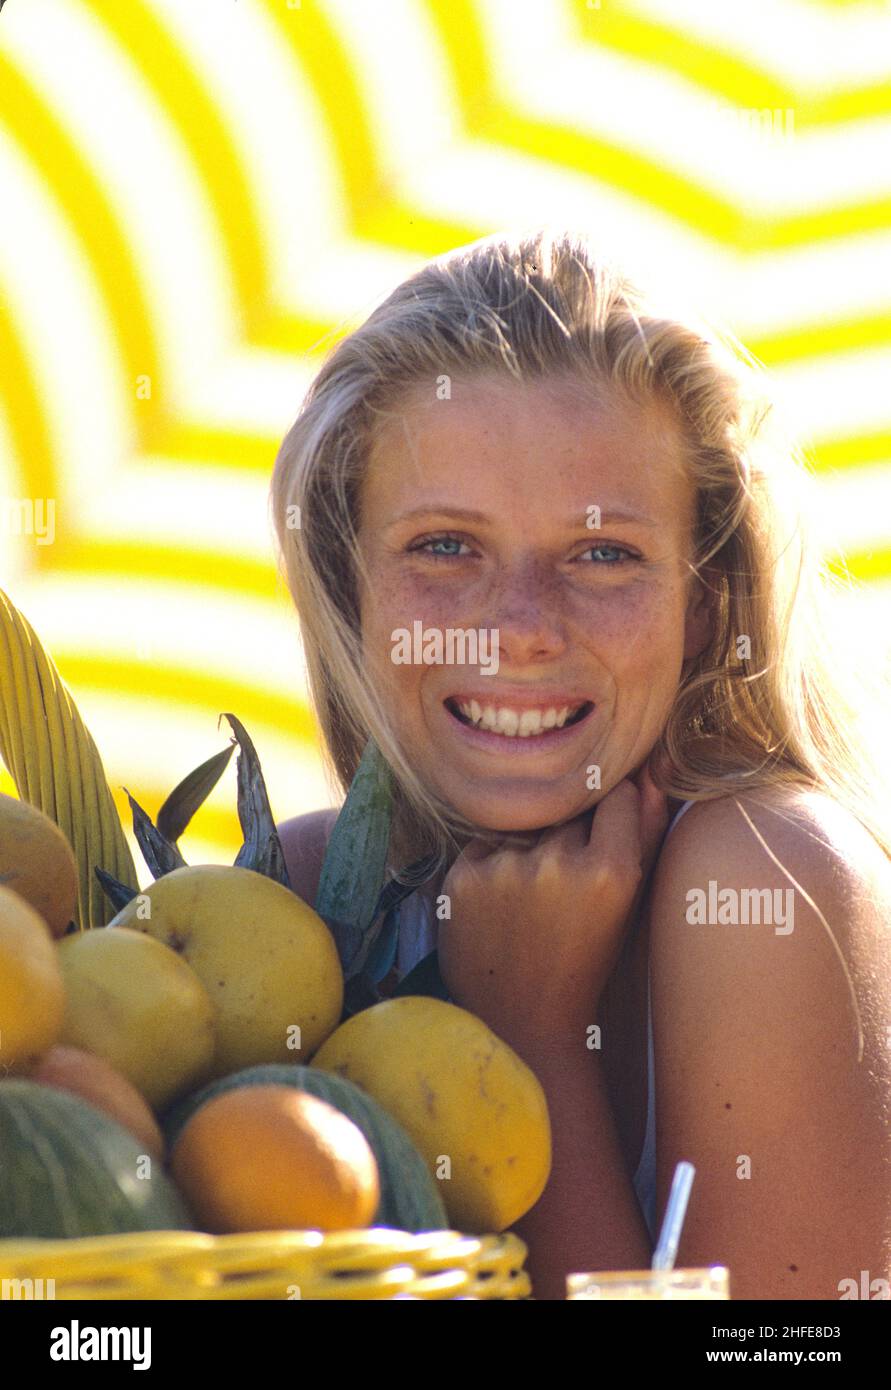 blond hair pretty young girl portrait sweet smiling face  blue eyes natural look above fruits basket yellow umbrella background Stock Photo